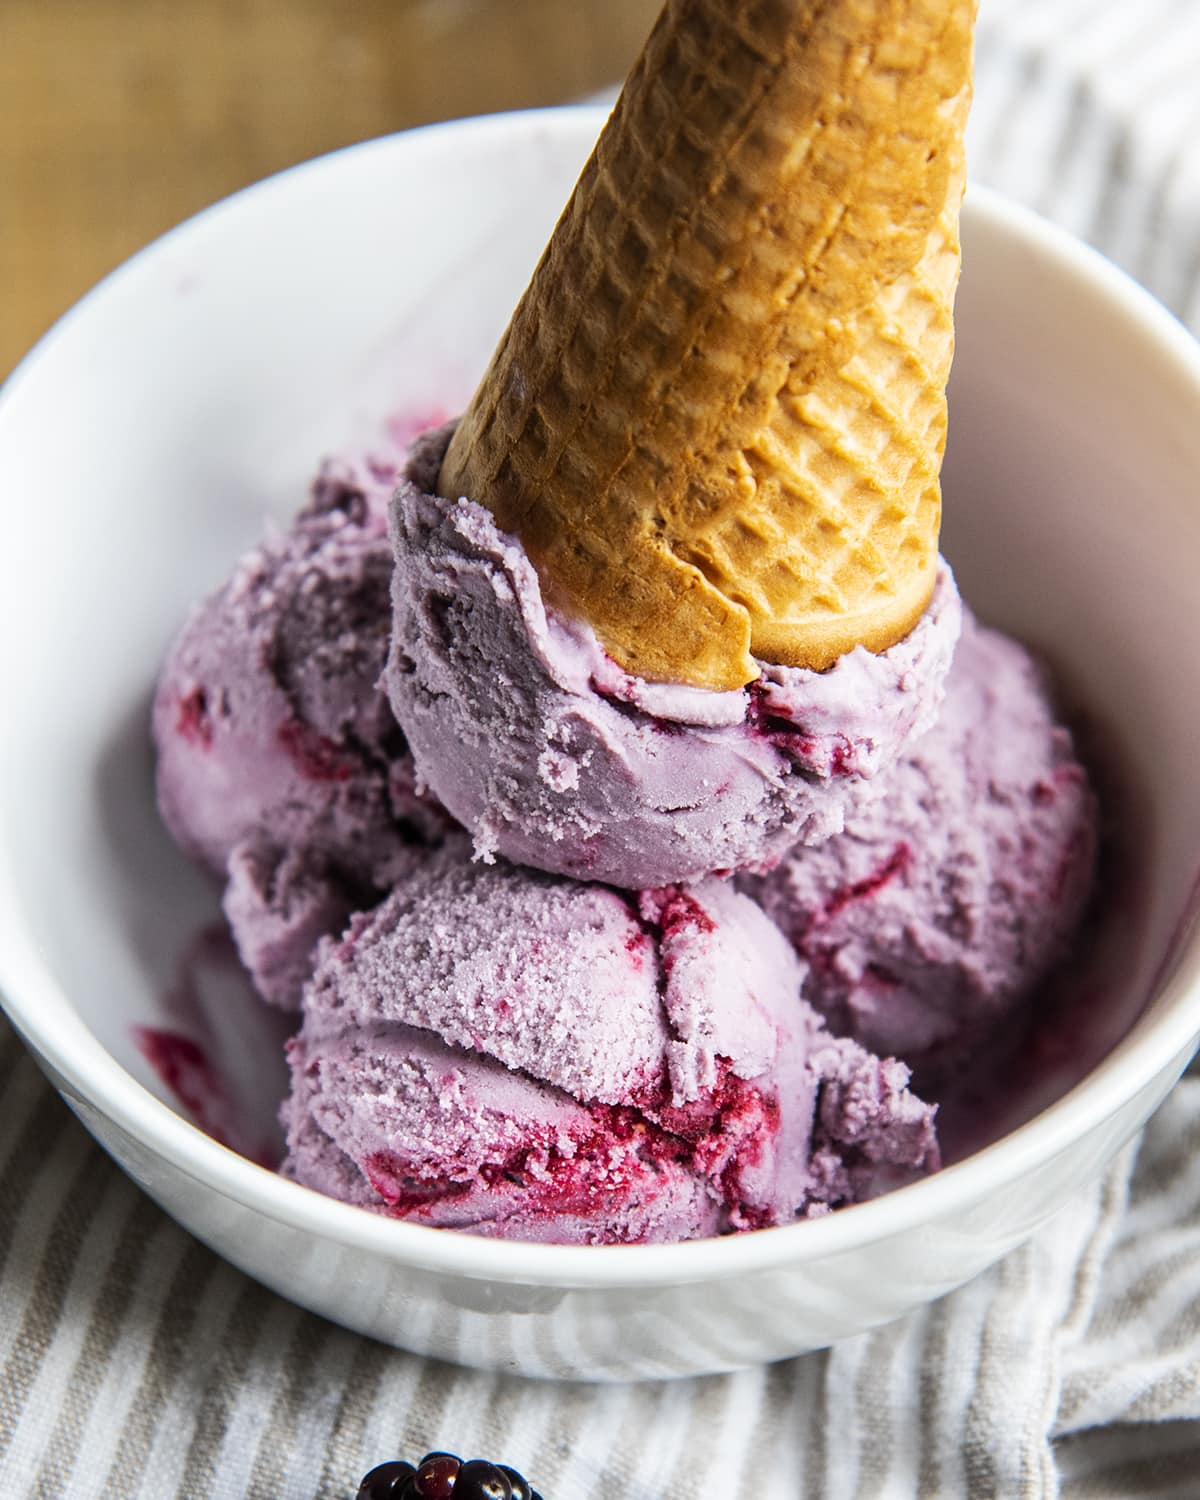 Blackberry ice cream in a bowl topped with an upside down ice cream cone.